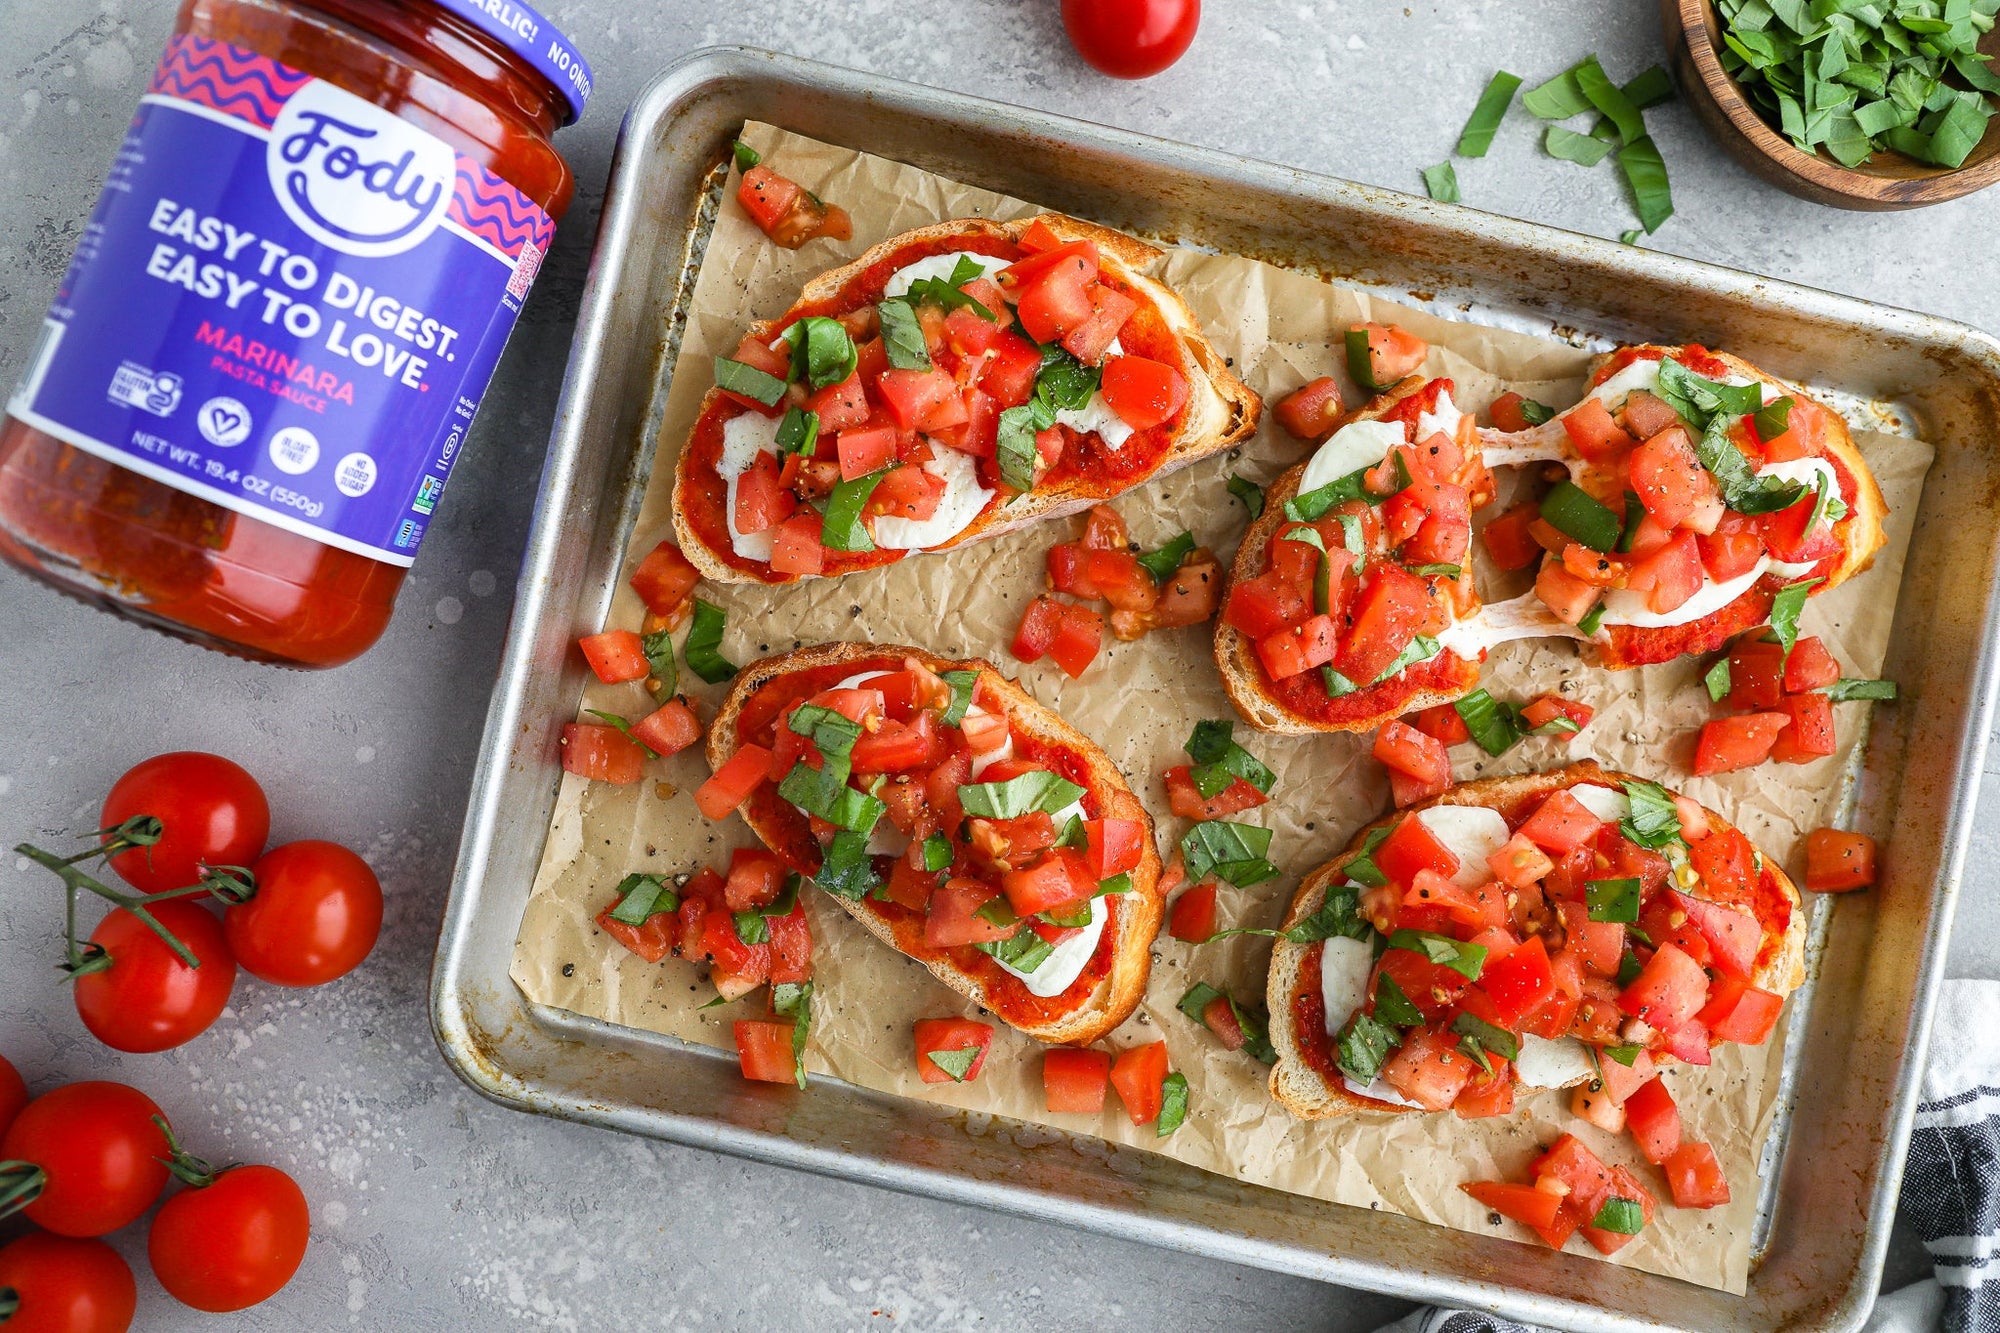 Cheesy bruschetta toast is an easy, gut-friendly snack you can enjoy anytime!